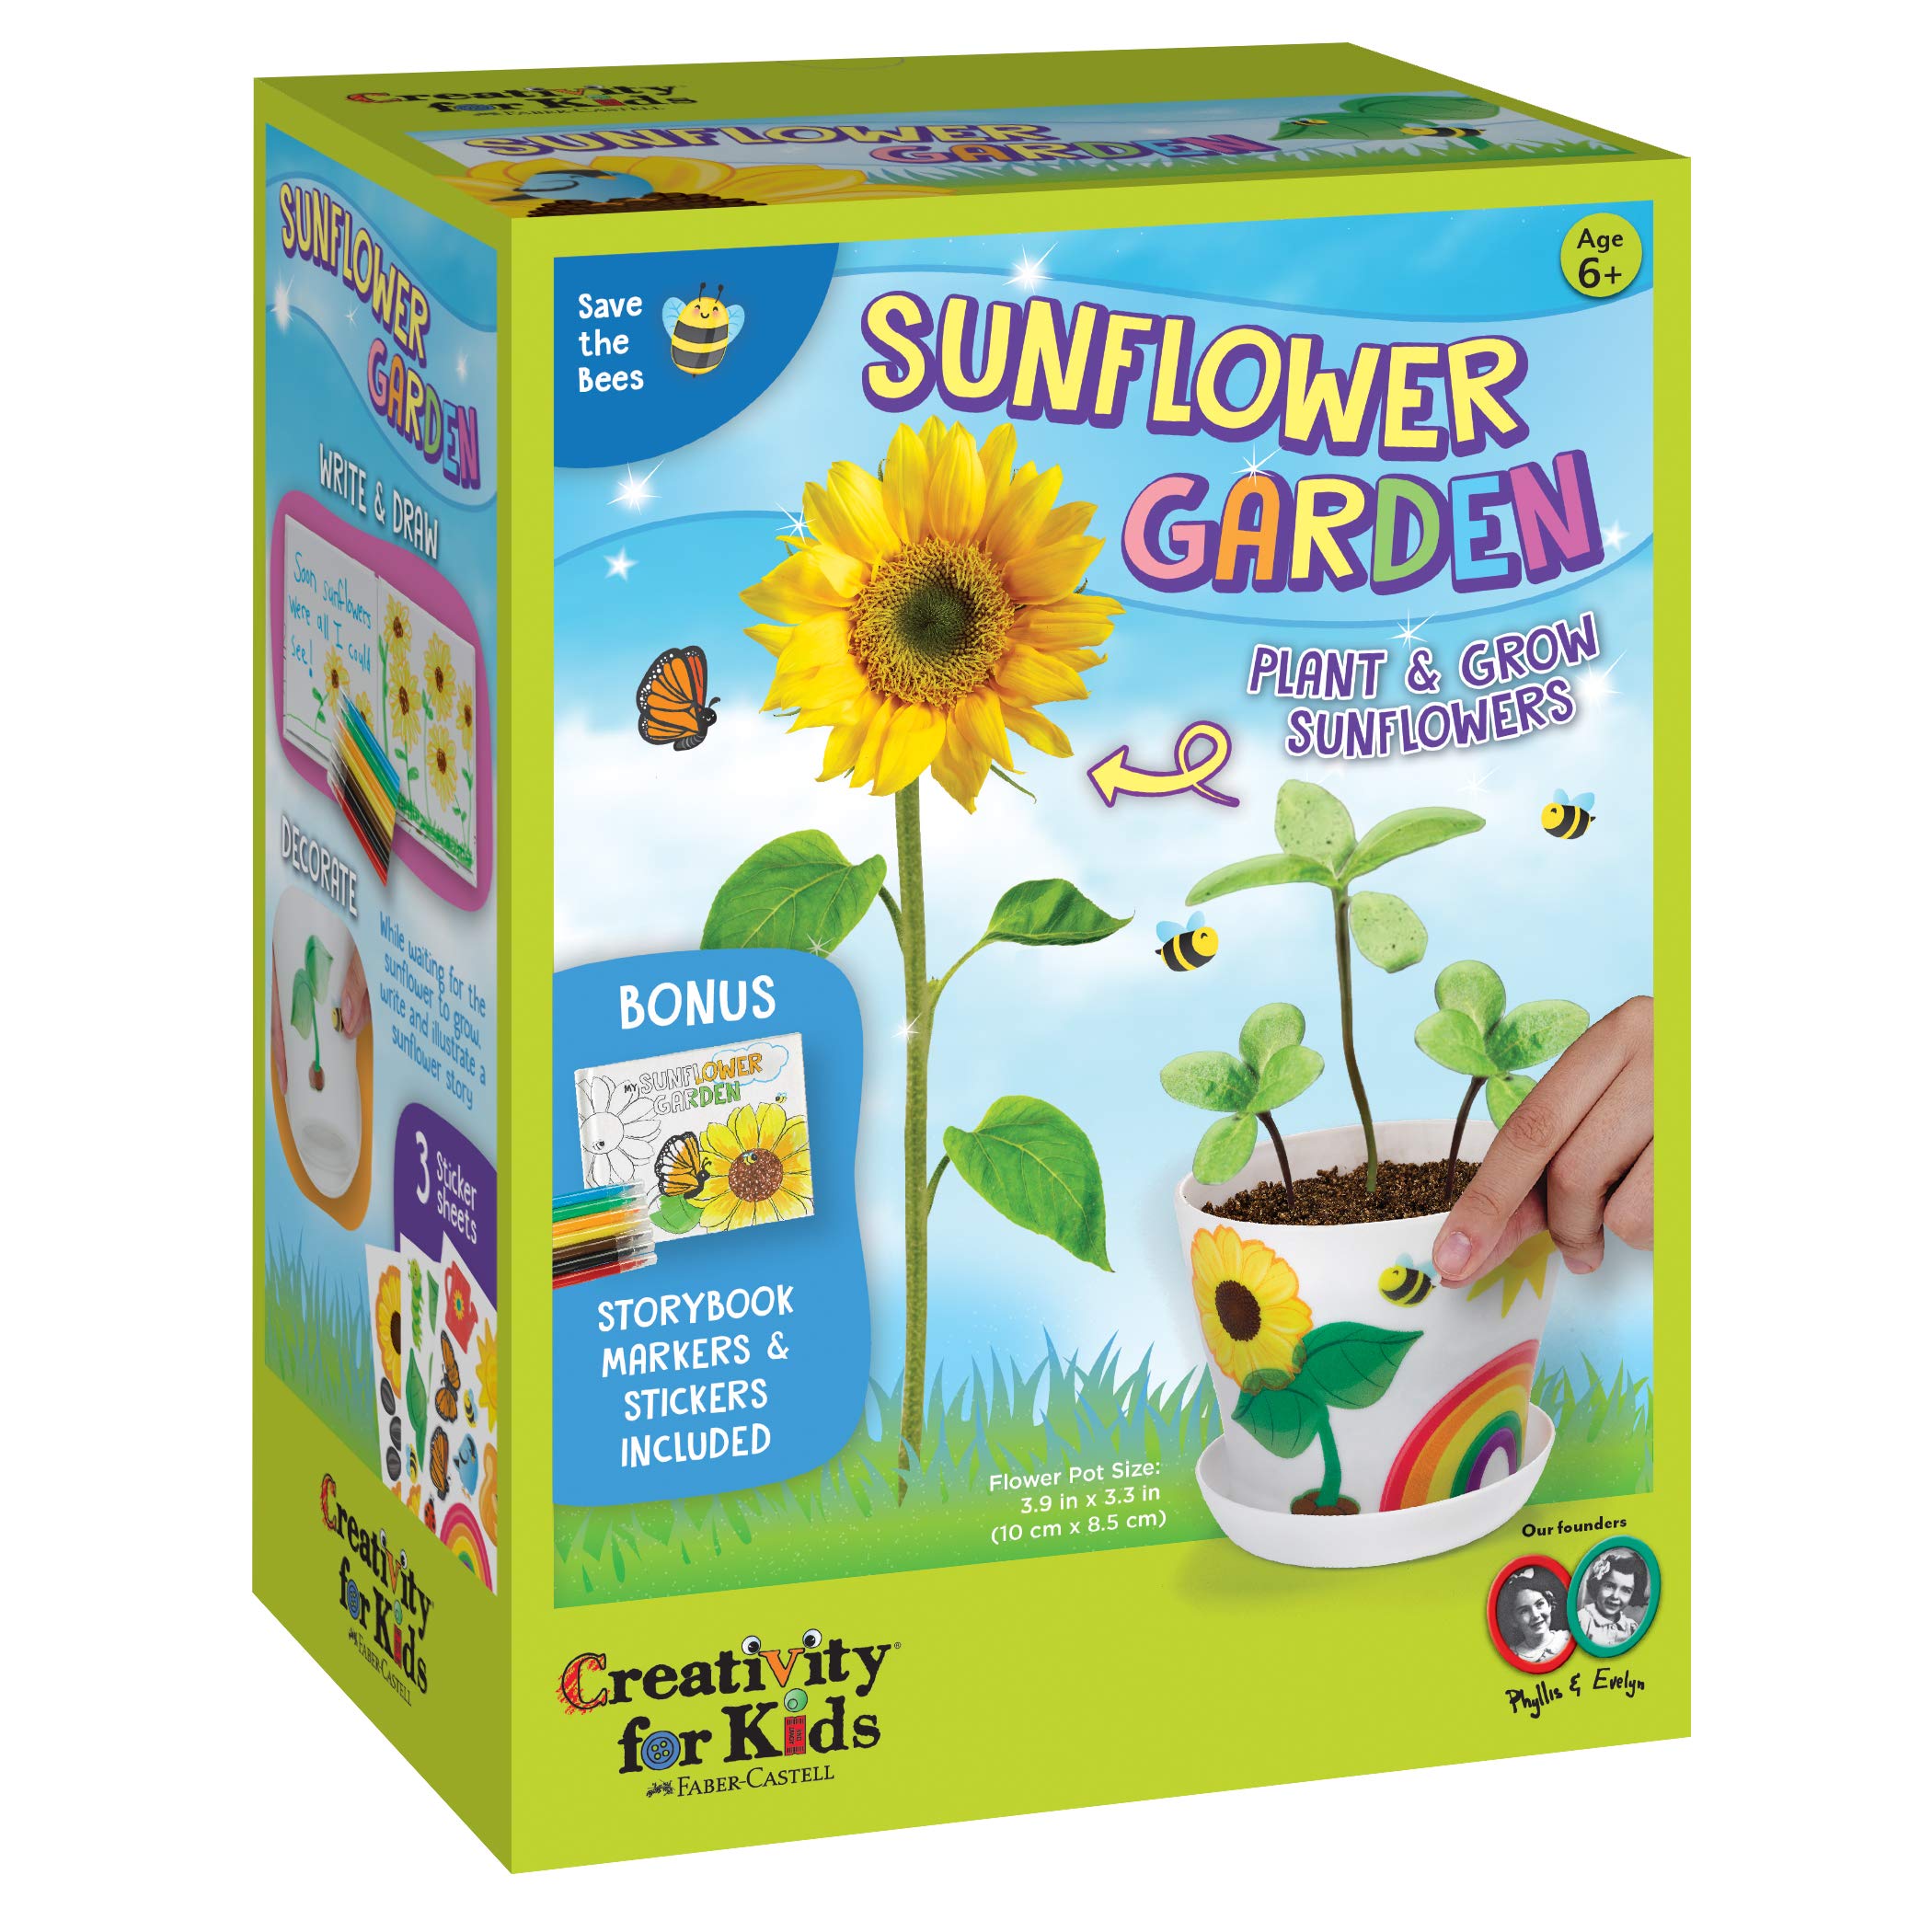 Creativity for Kids Sunflower Garden Growing Set $7.99 + Free Shipping w/ Prime or on $35+